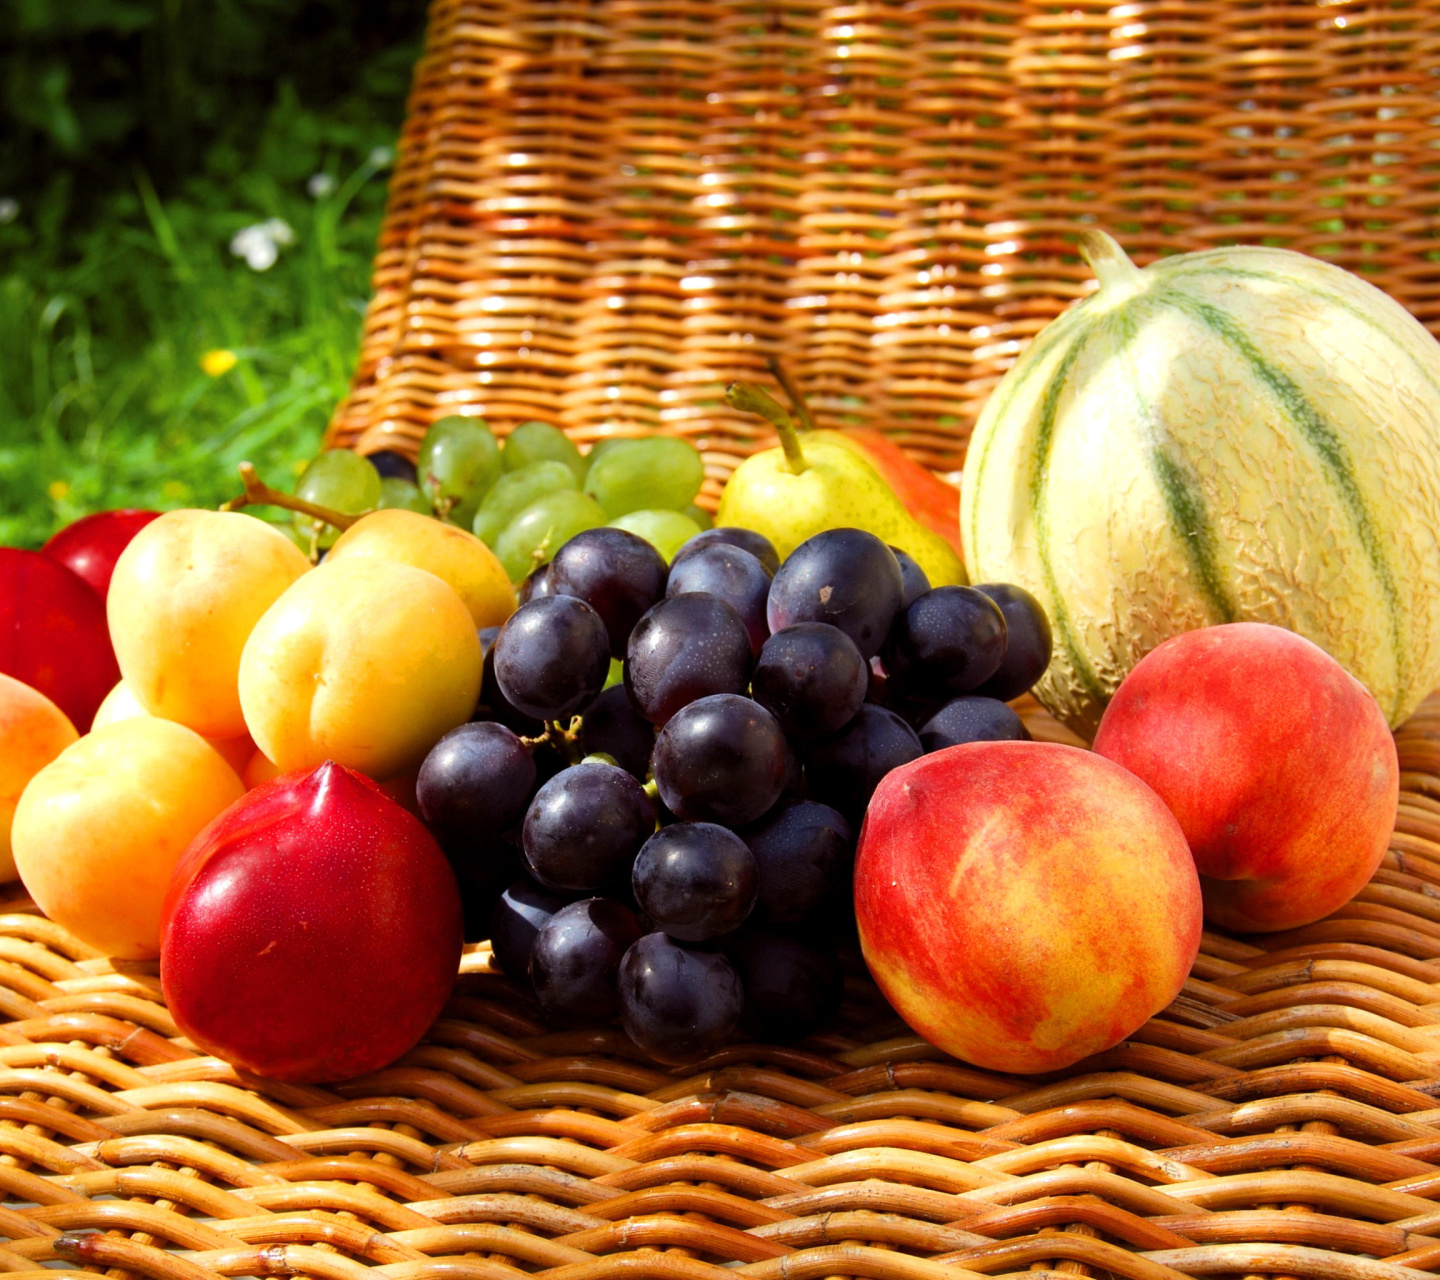 Melons, apricots, peaches, nectarines, grapes, pear screenshot #1 1440x1280